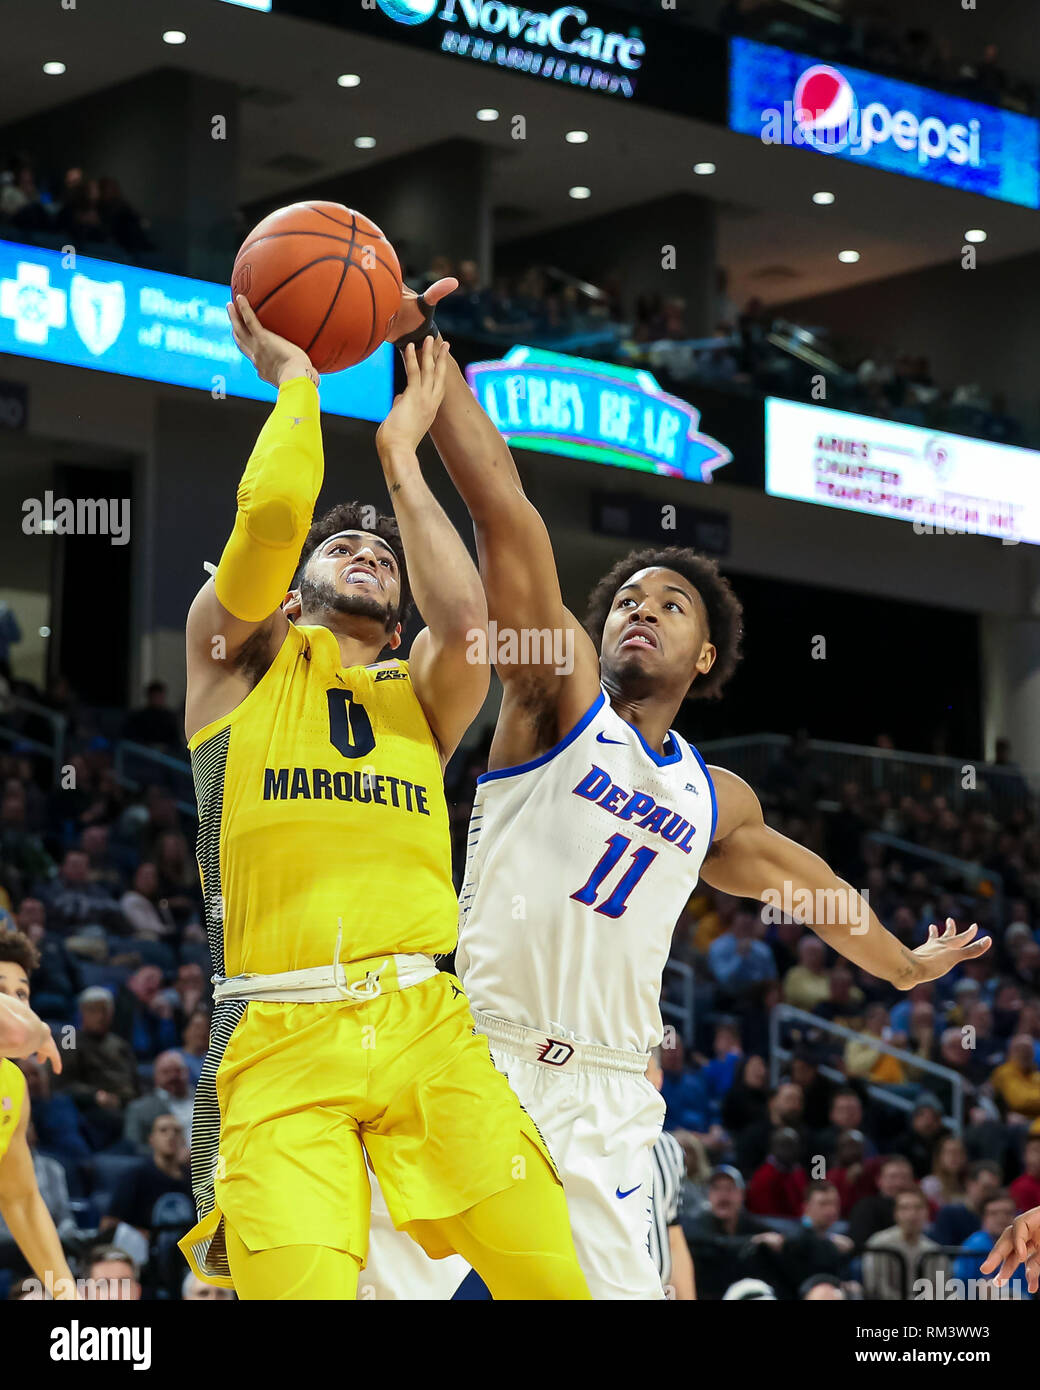 Chicago, USA. 12th Feb 2019. Marquette Golden Eagles guard Markus Howard (0) is fouled by DePaul Blue Demons guard Eli Cain (11) on a drive to the basket during NCAA basketball game between the Marquette Golden Eagles and the DePaul University Blue Demons at Wintrust Arena in Chicago IL. Gary E. Duncan Sr/CSM Credit: Cal Sport Media/Alamy Live News Stock Photo